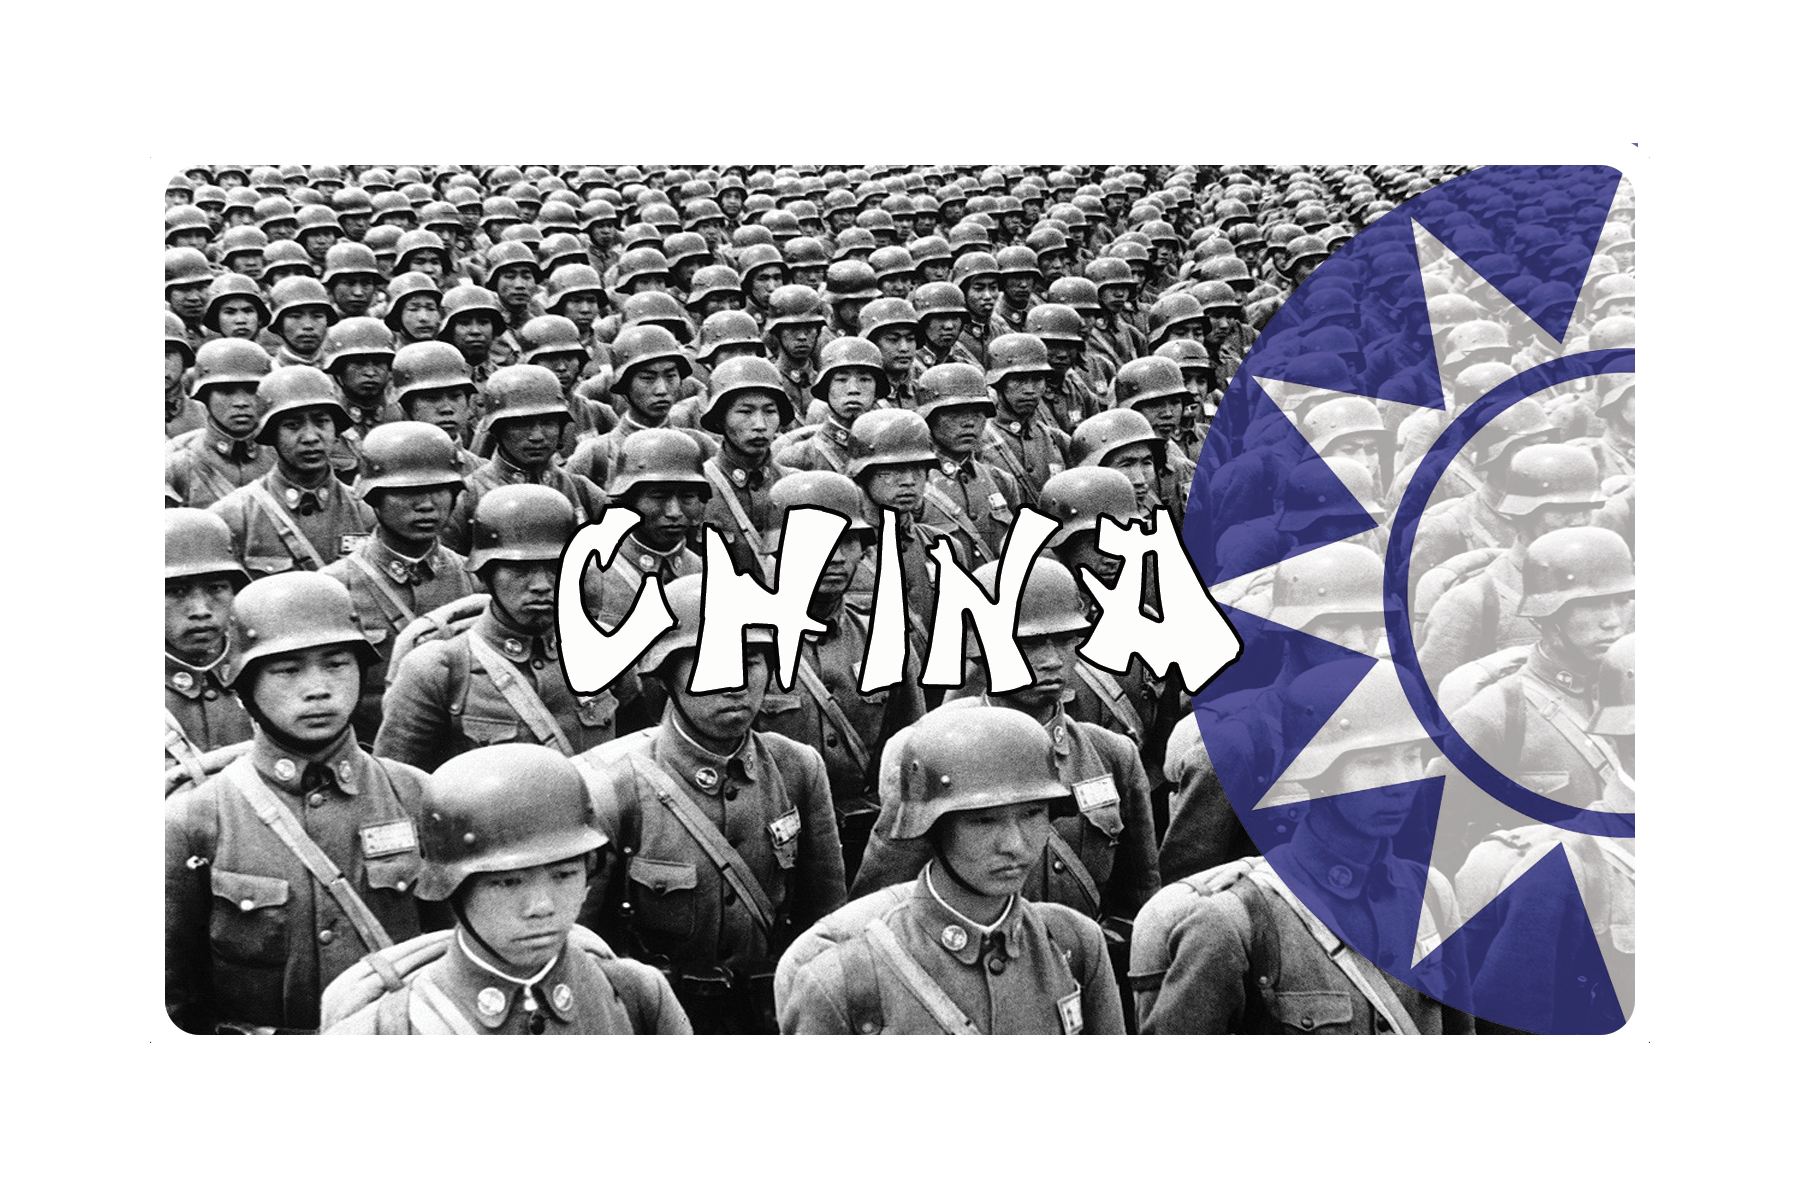 3.5" x 5.5" Nationalist Chinese Roundel Combat Label with Title